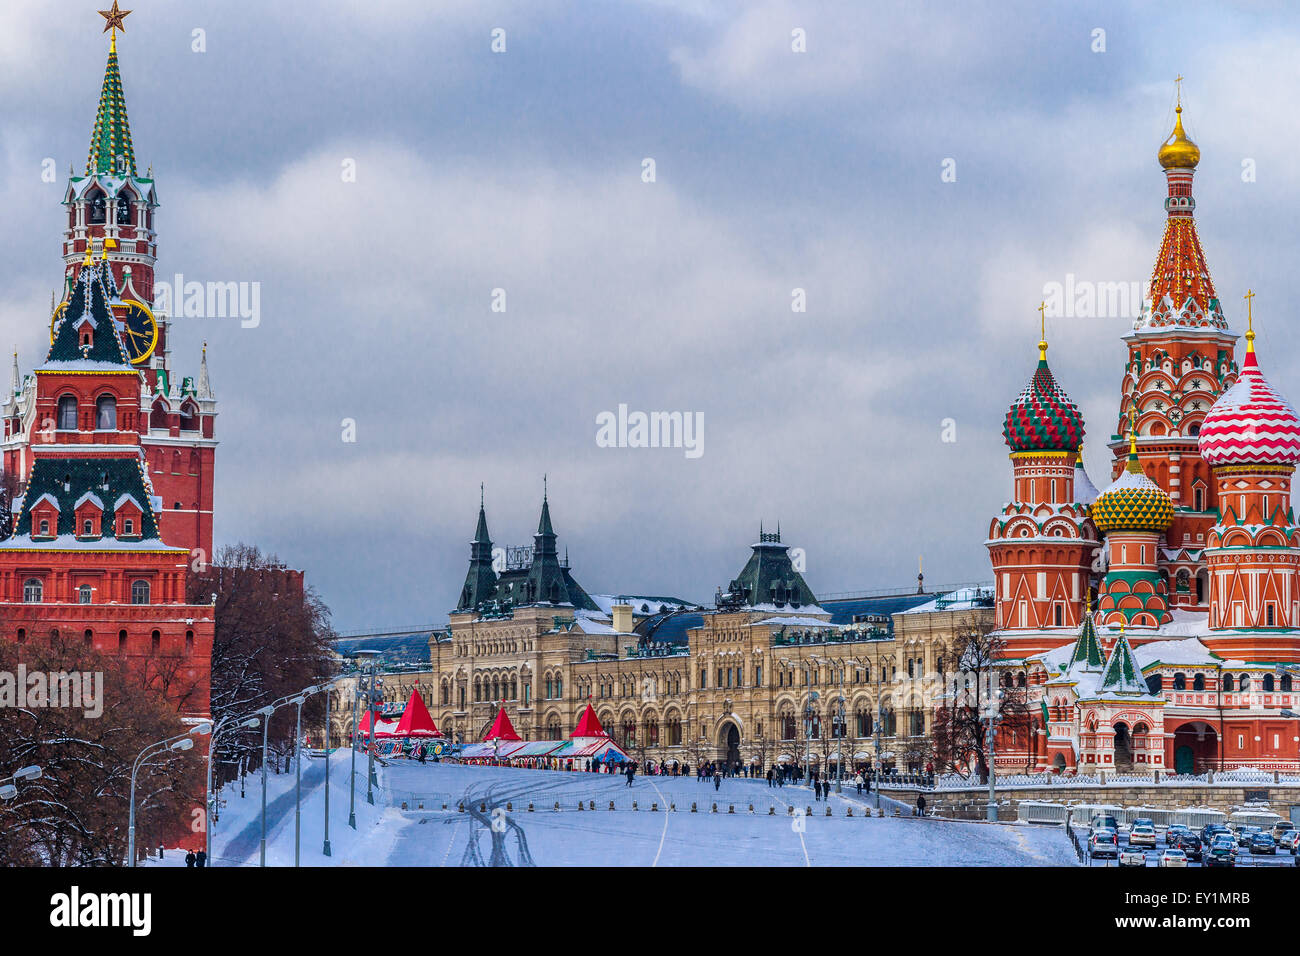 Moscow Red Square in winter. The Kremlin towers (left) skating rink on Red Square (center), St. Basil's cathedral (right) Stock Photo